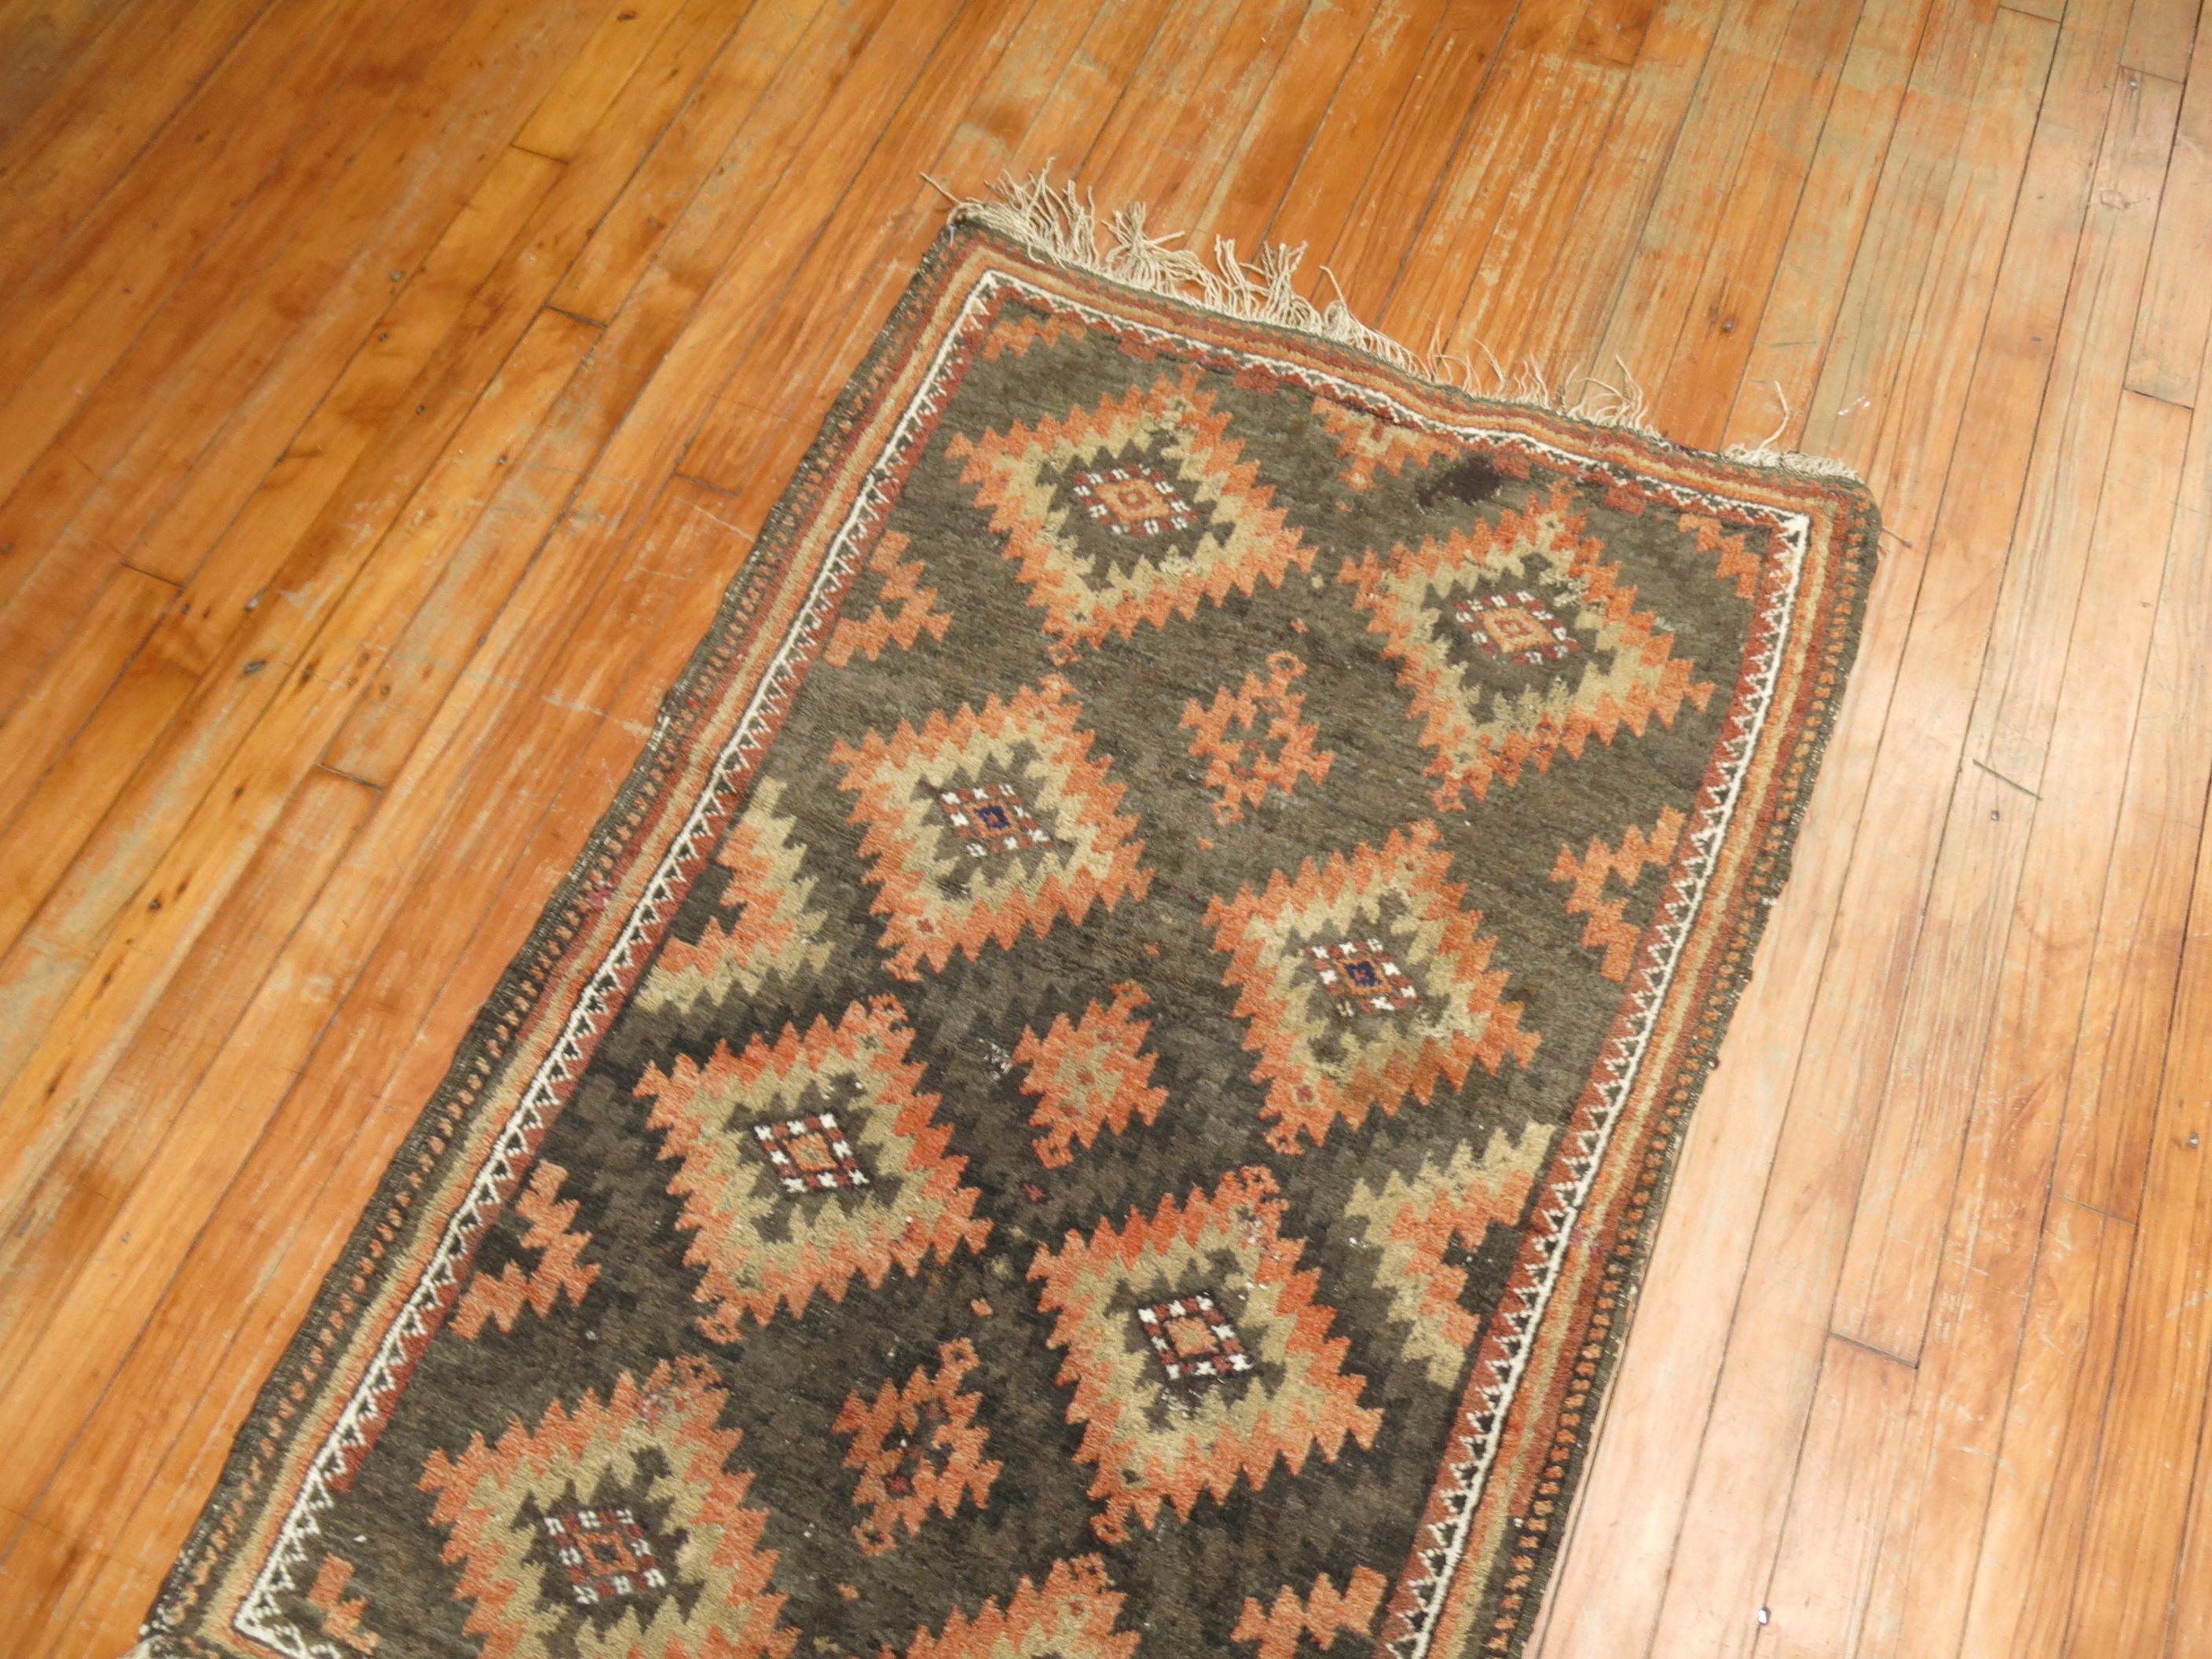 Wool Tribal Brown Orange Color Persian Balouch Rug For Sale